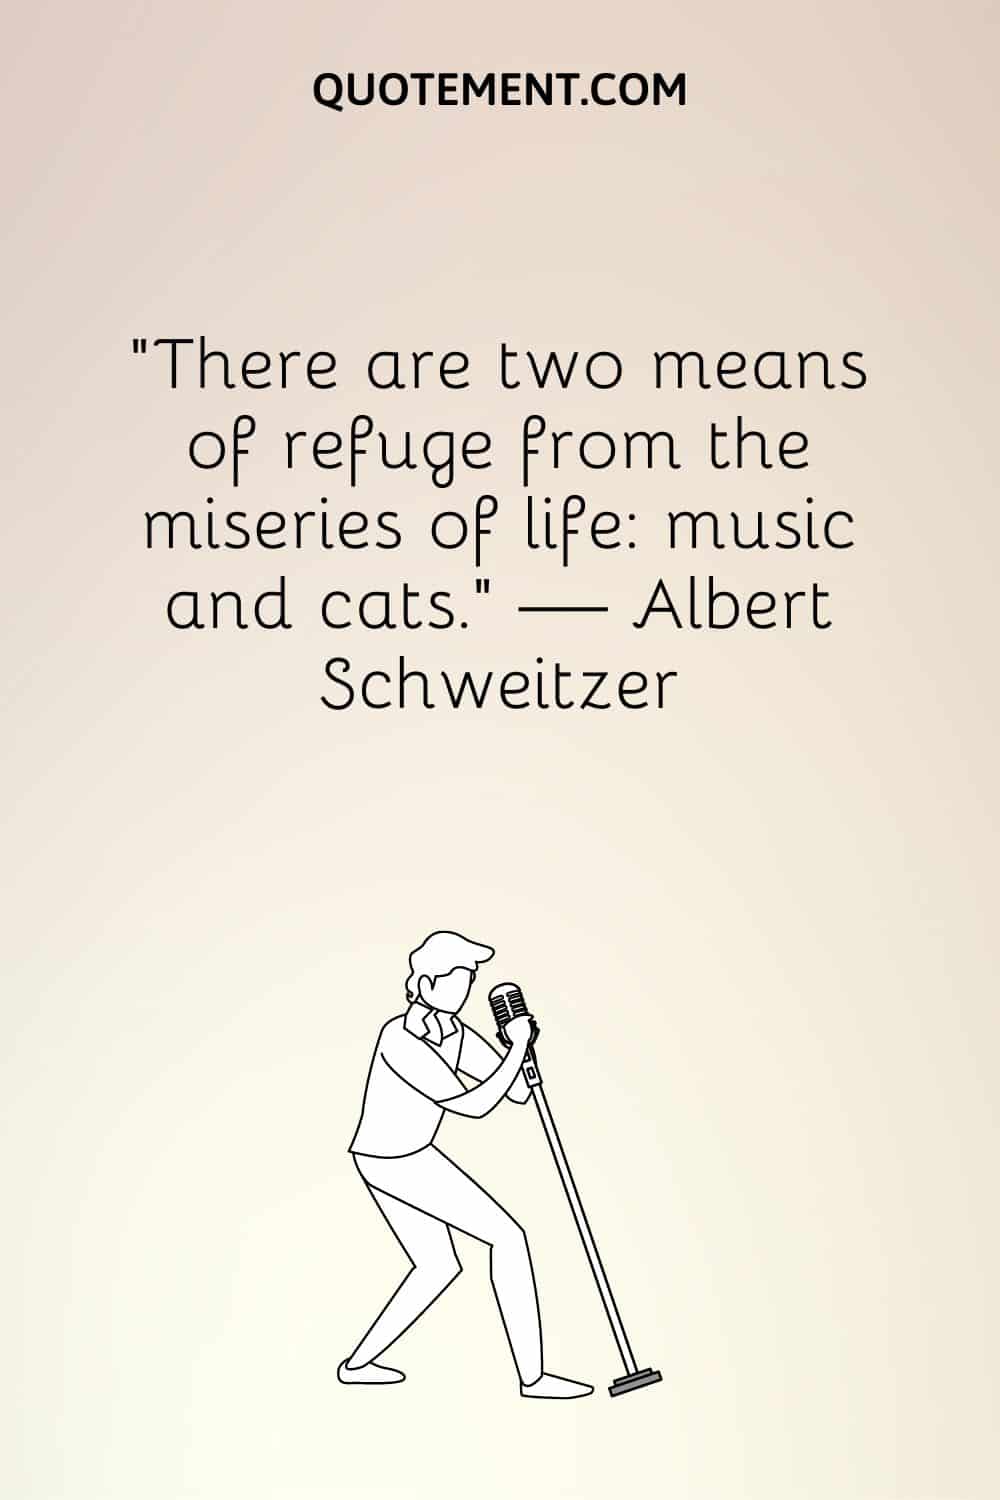 “There are two means of refuge from the miseries of life music and cats.” — Albert Schweitzer